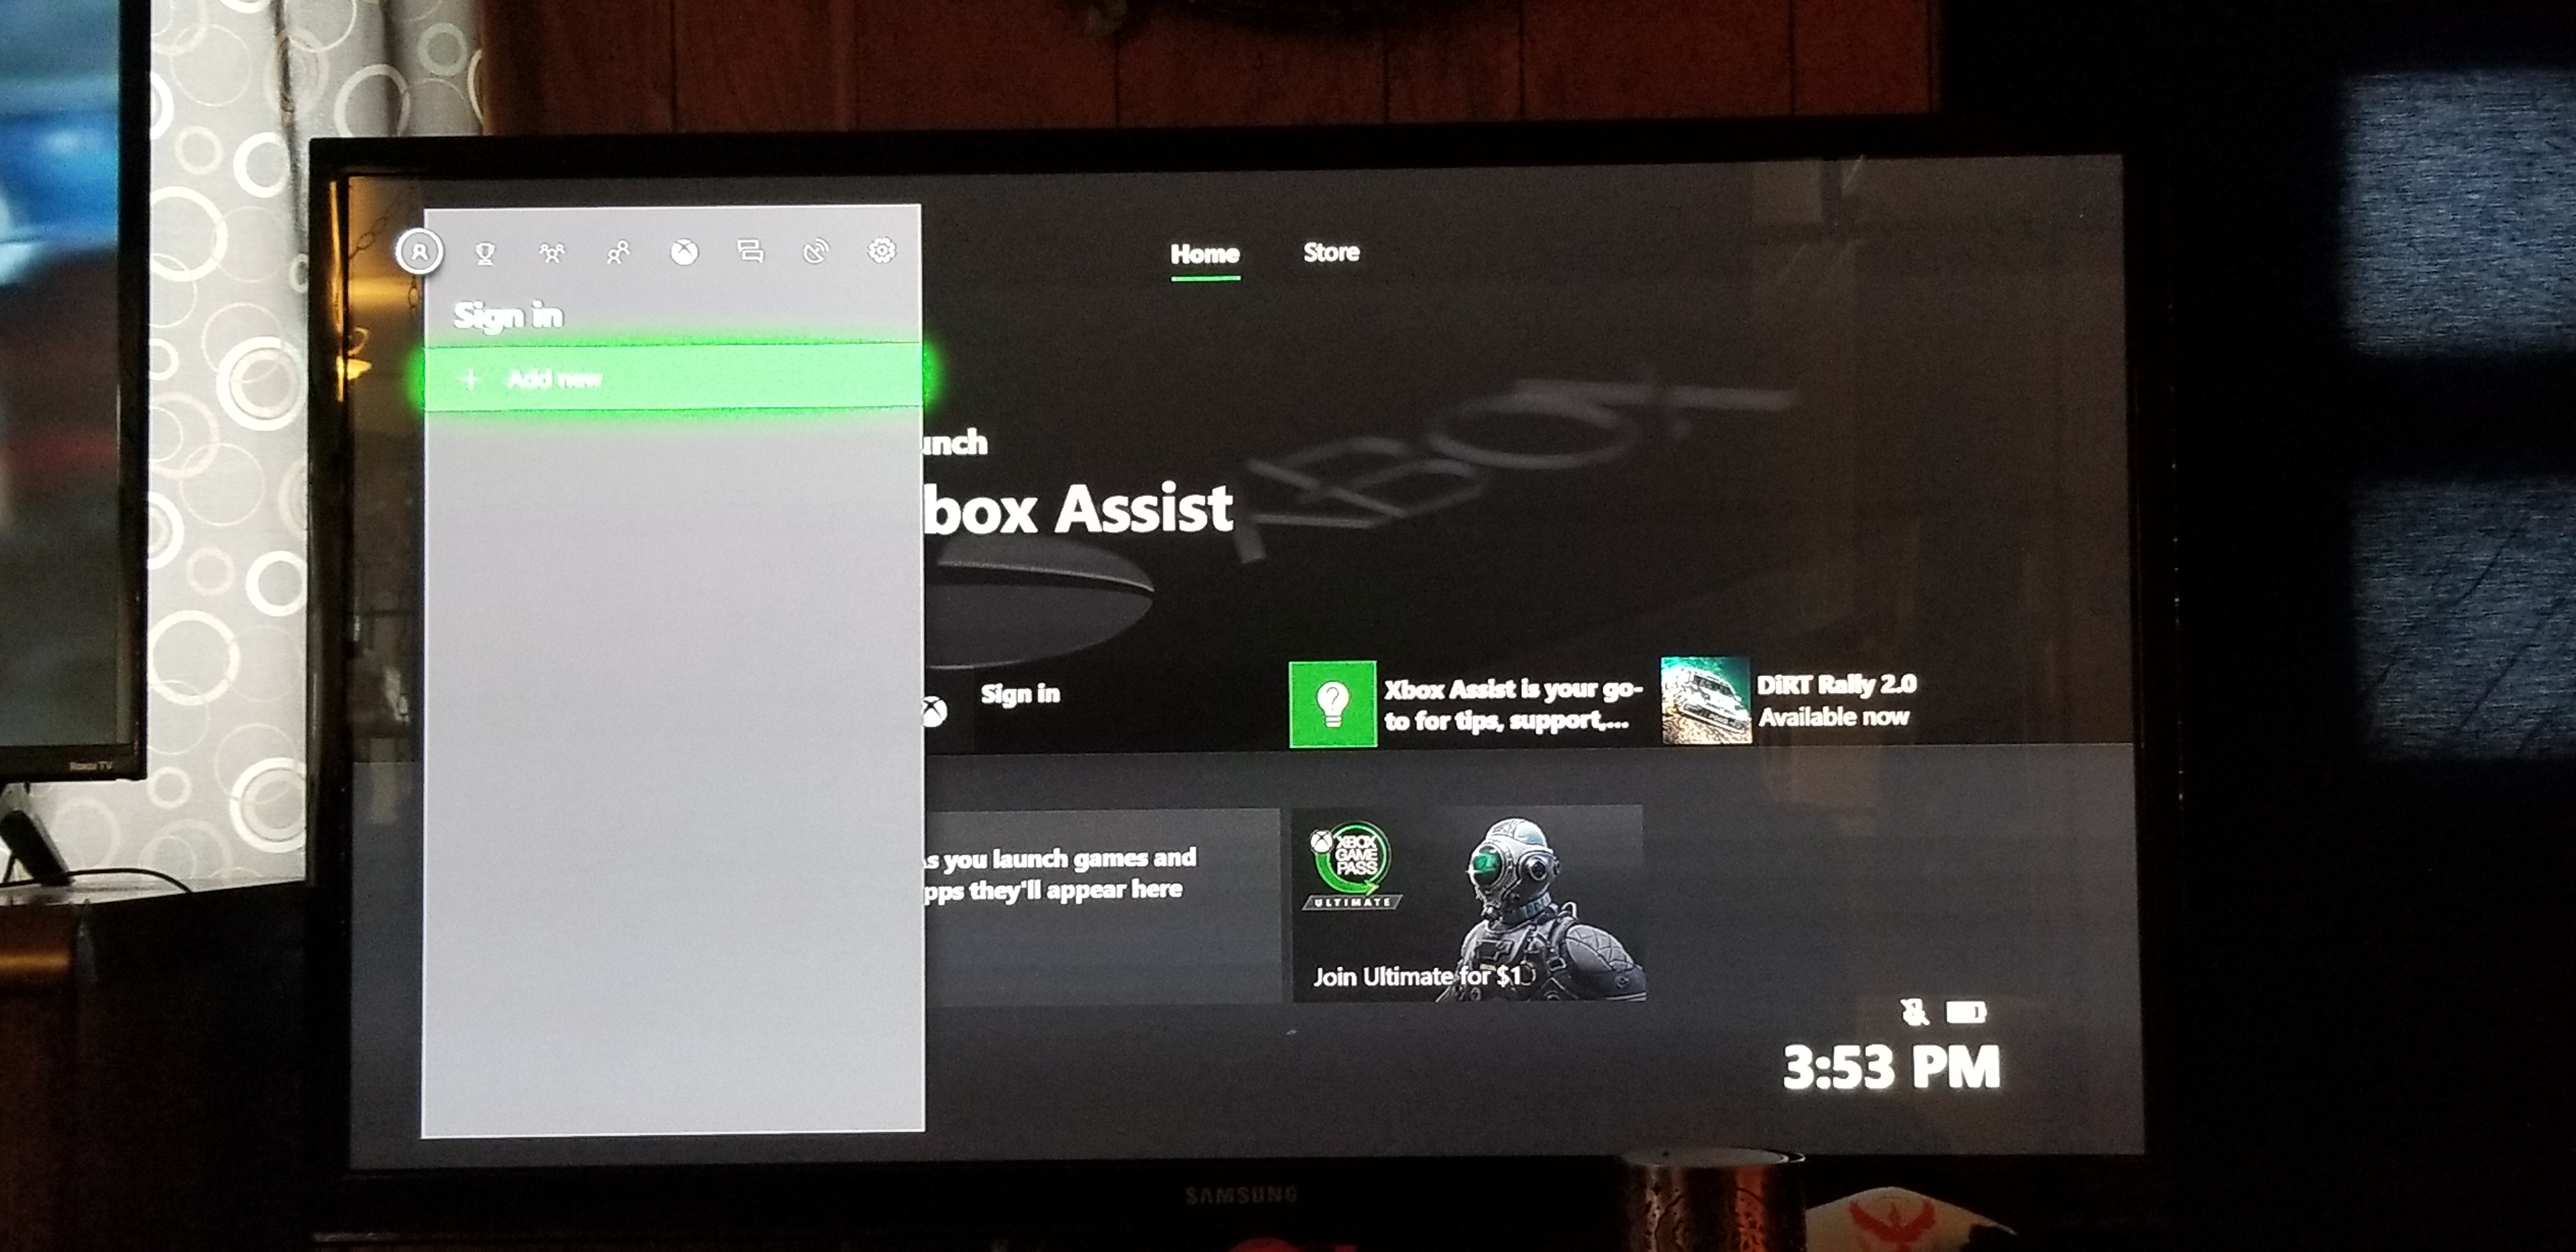 Appal Gasvormig Zakenman Xbox wont let me add any accounts to sign in - Microsoft Community